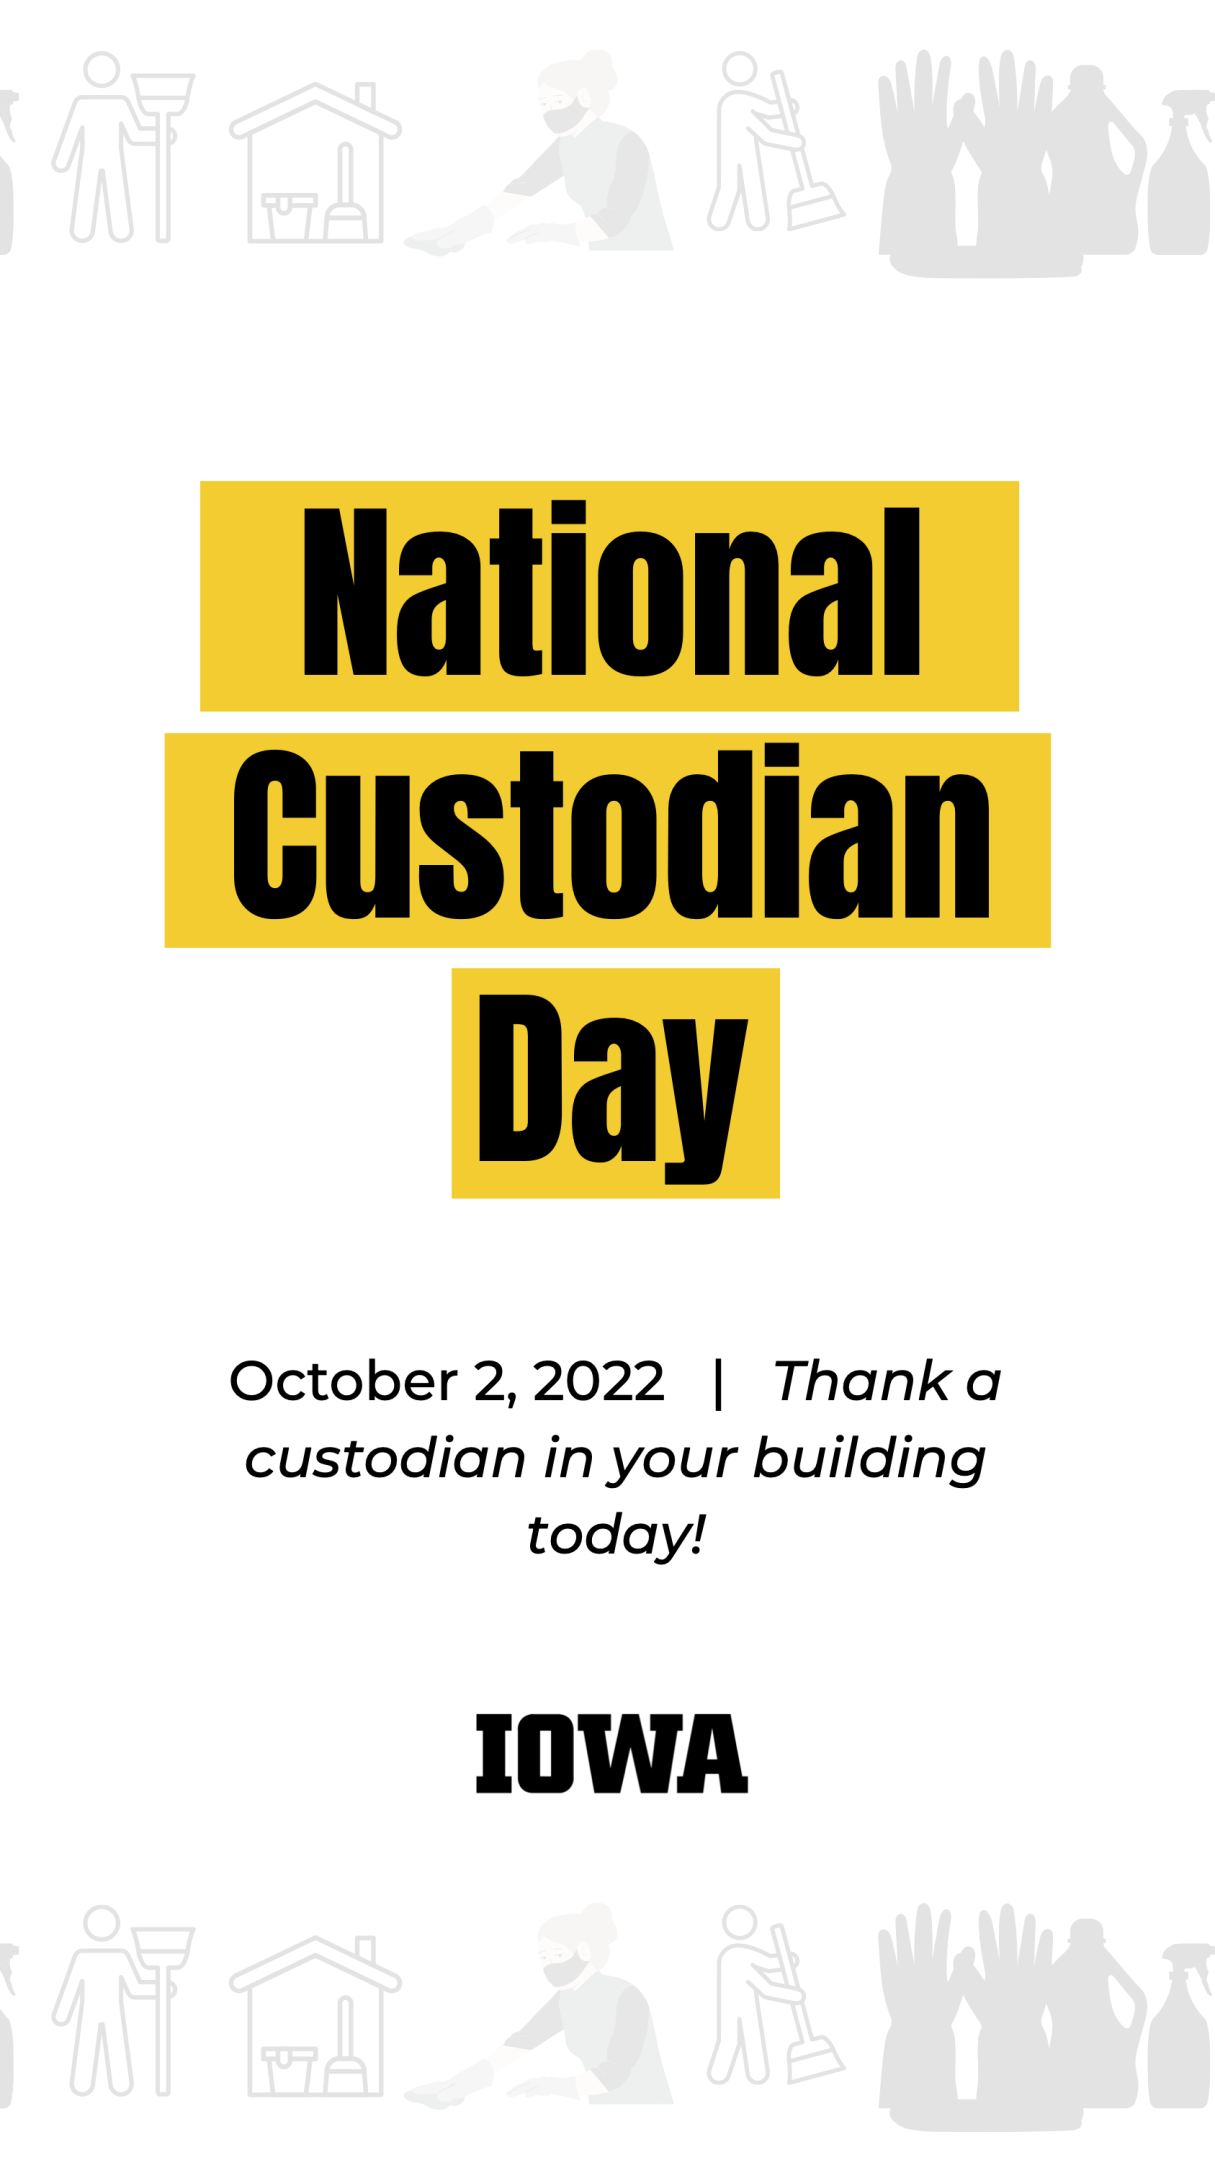 White background with grey images of workers and the words "National Custodian Day"